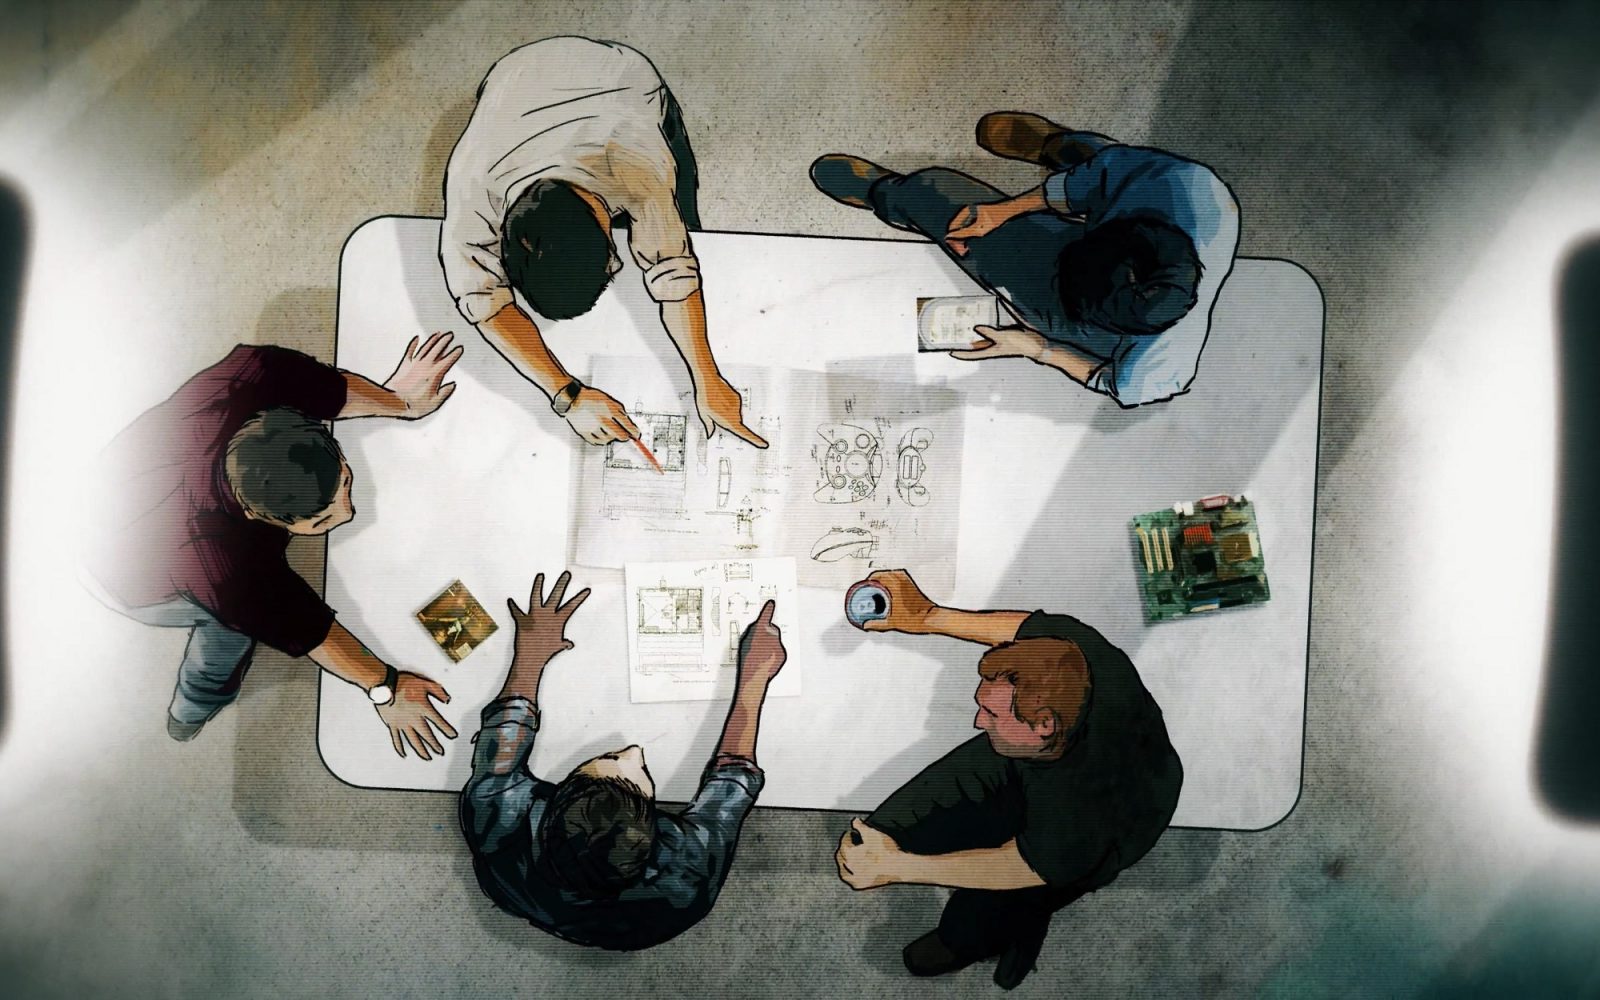 Illustration of five men working at a table, as seen from above